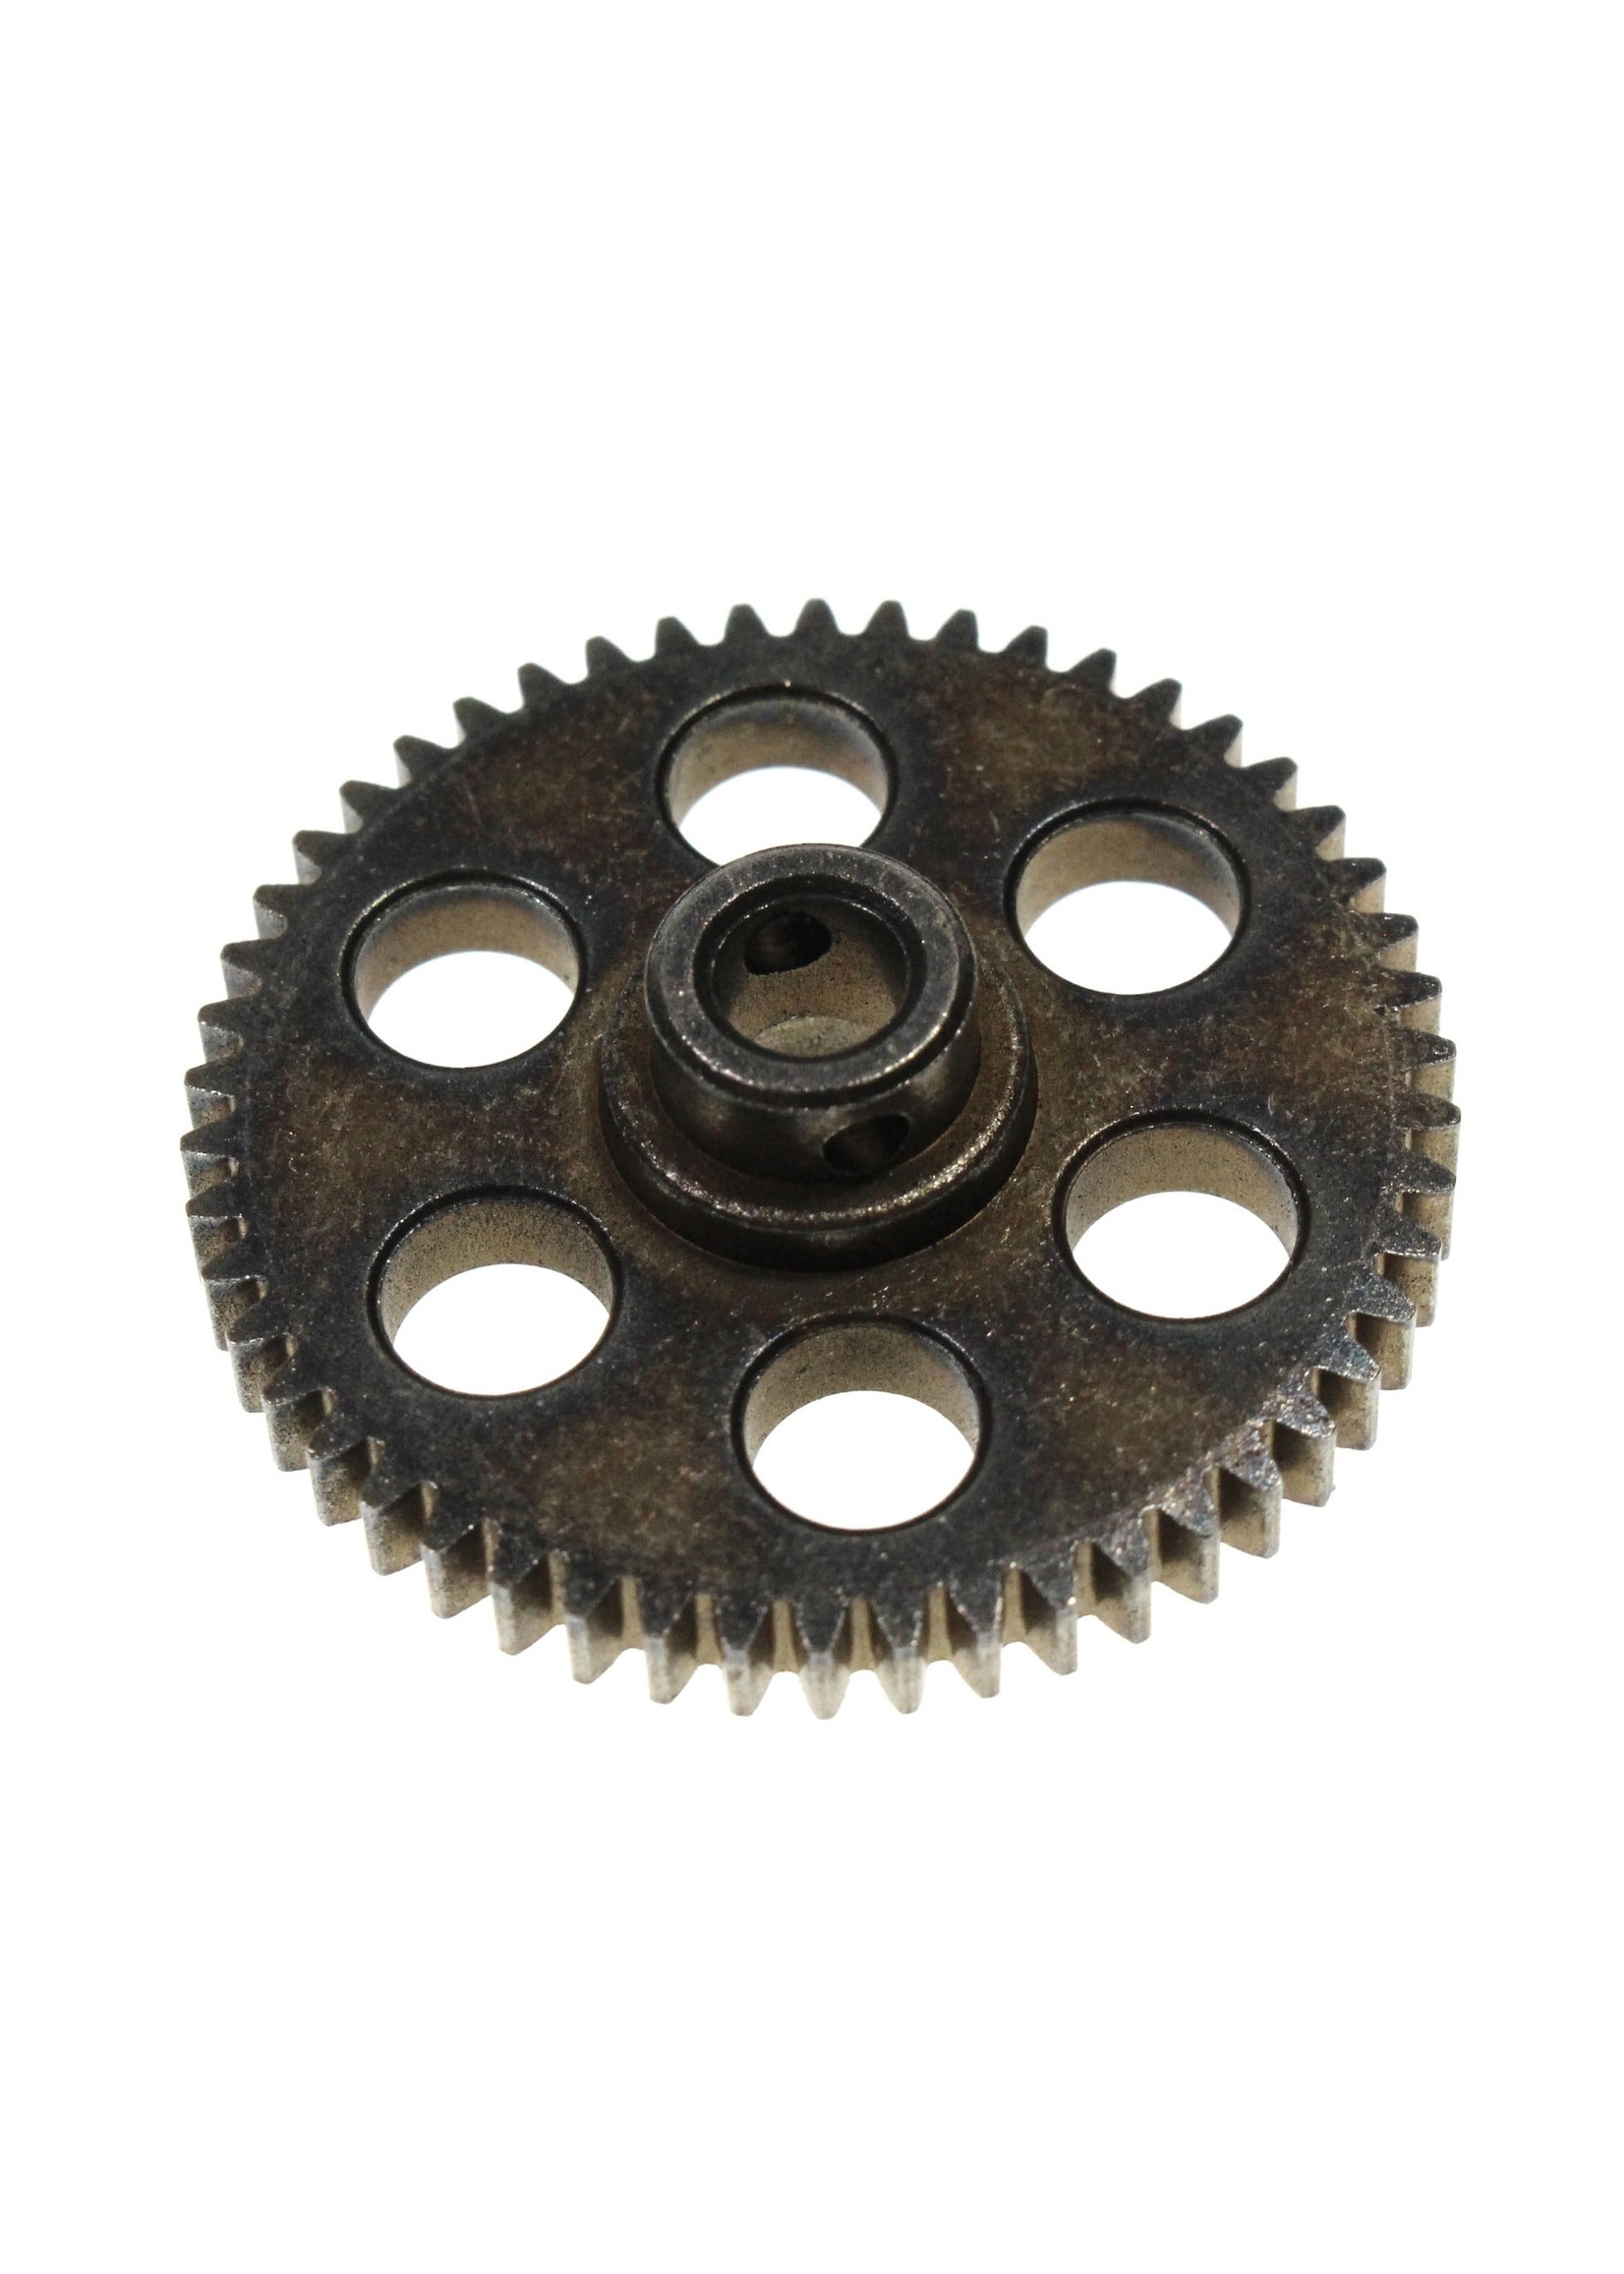 Racers Edge RCE6402 Racers Edge Machined Metal Spur Gear for Blackzon Slyder